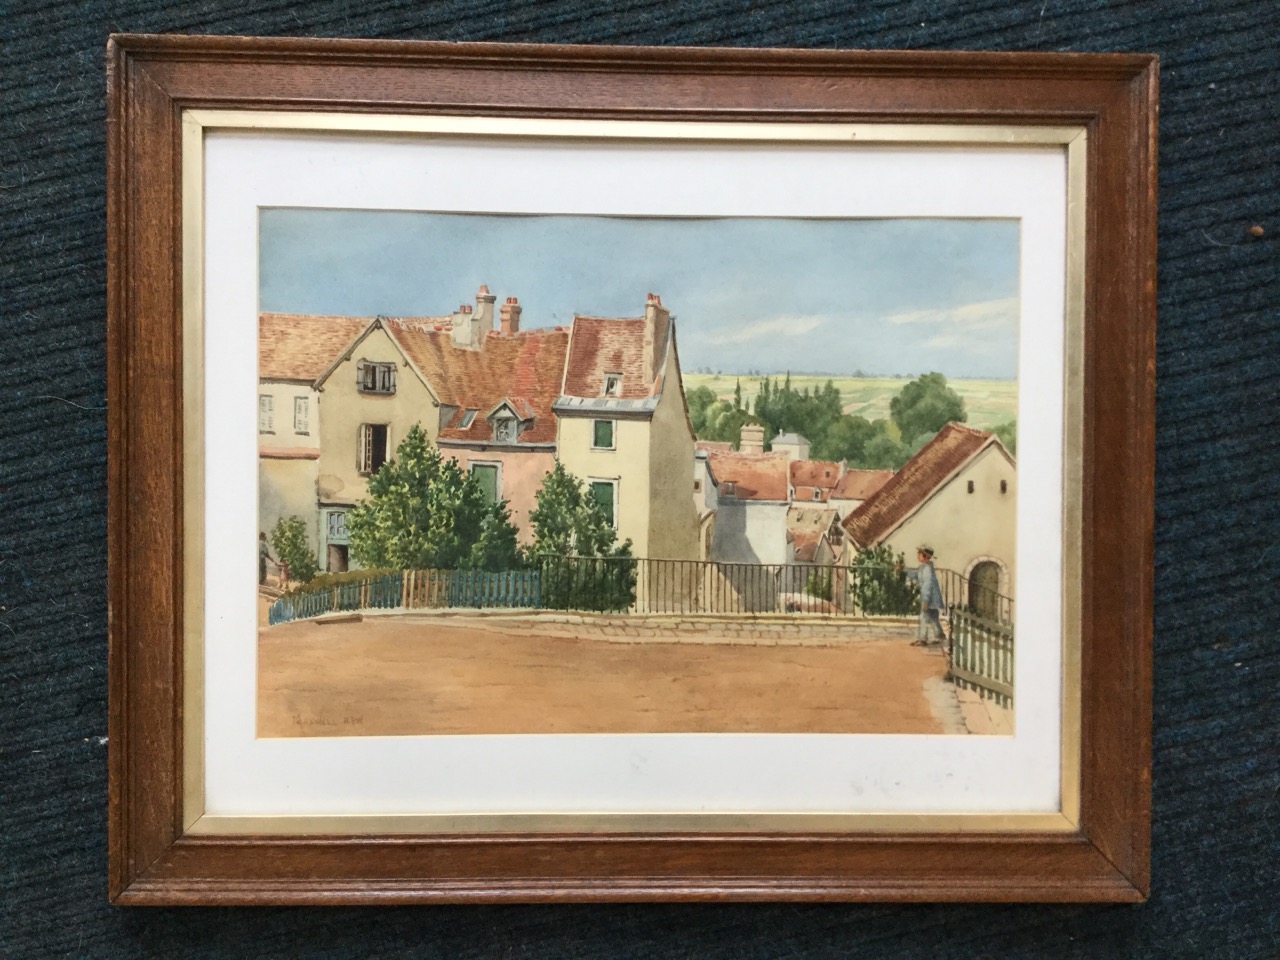 Maxwell RWS, C20th watercolour, streetscene with single figure by railings, signed, mounted and